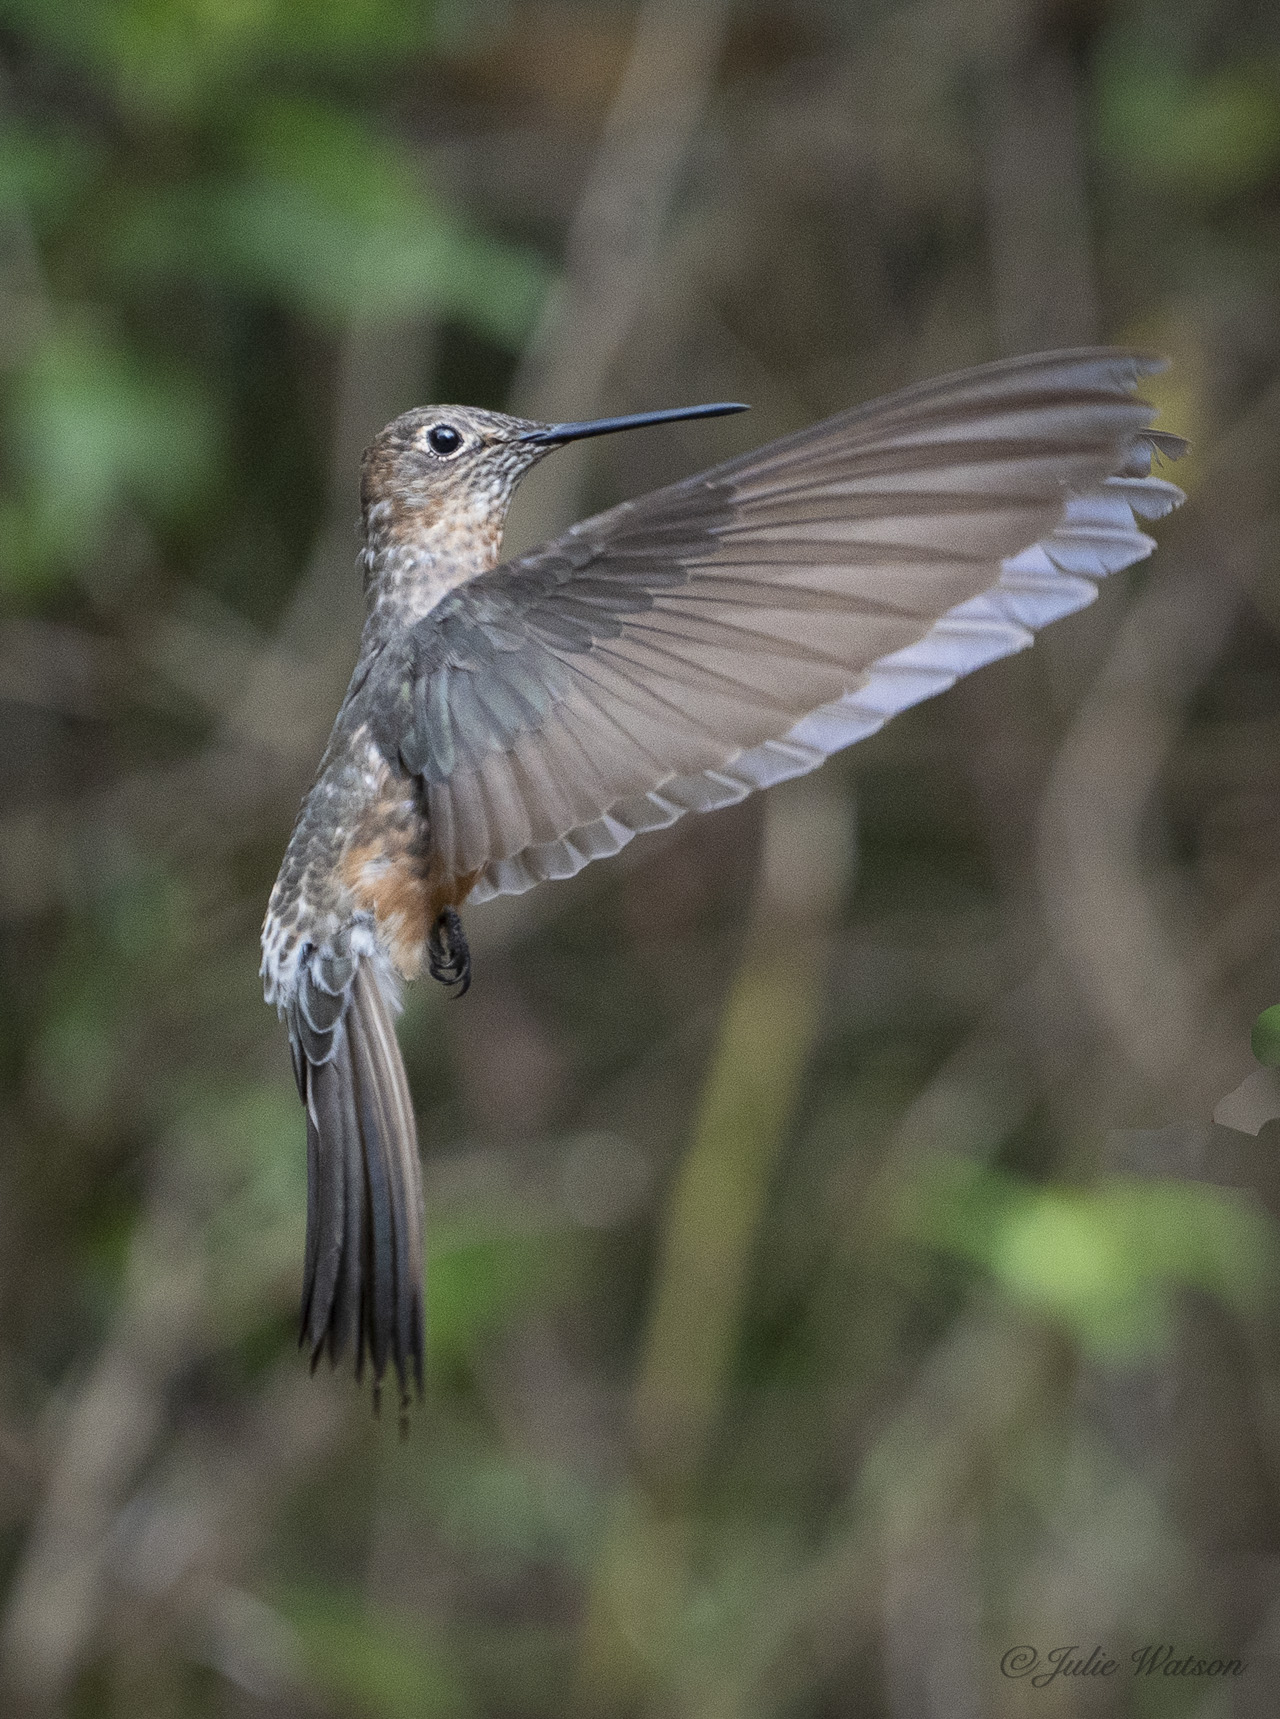 The Giant Hummingbird is the largest of all, with just 15 wingbeats per second. It doesn’t share the iridescence of its fellow subspecies, but is mainly brown and beige. 